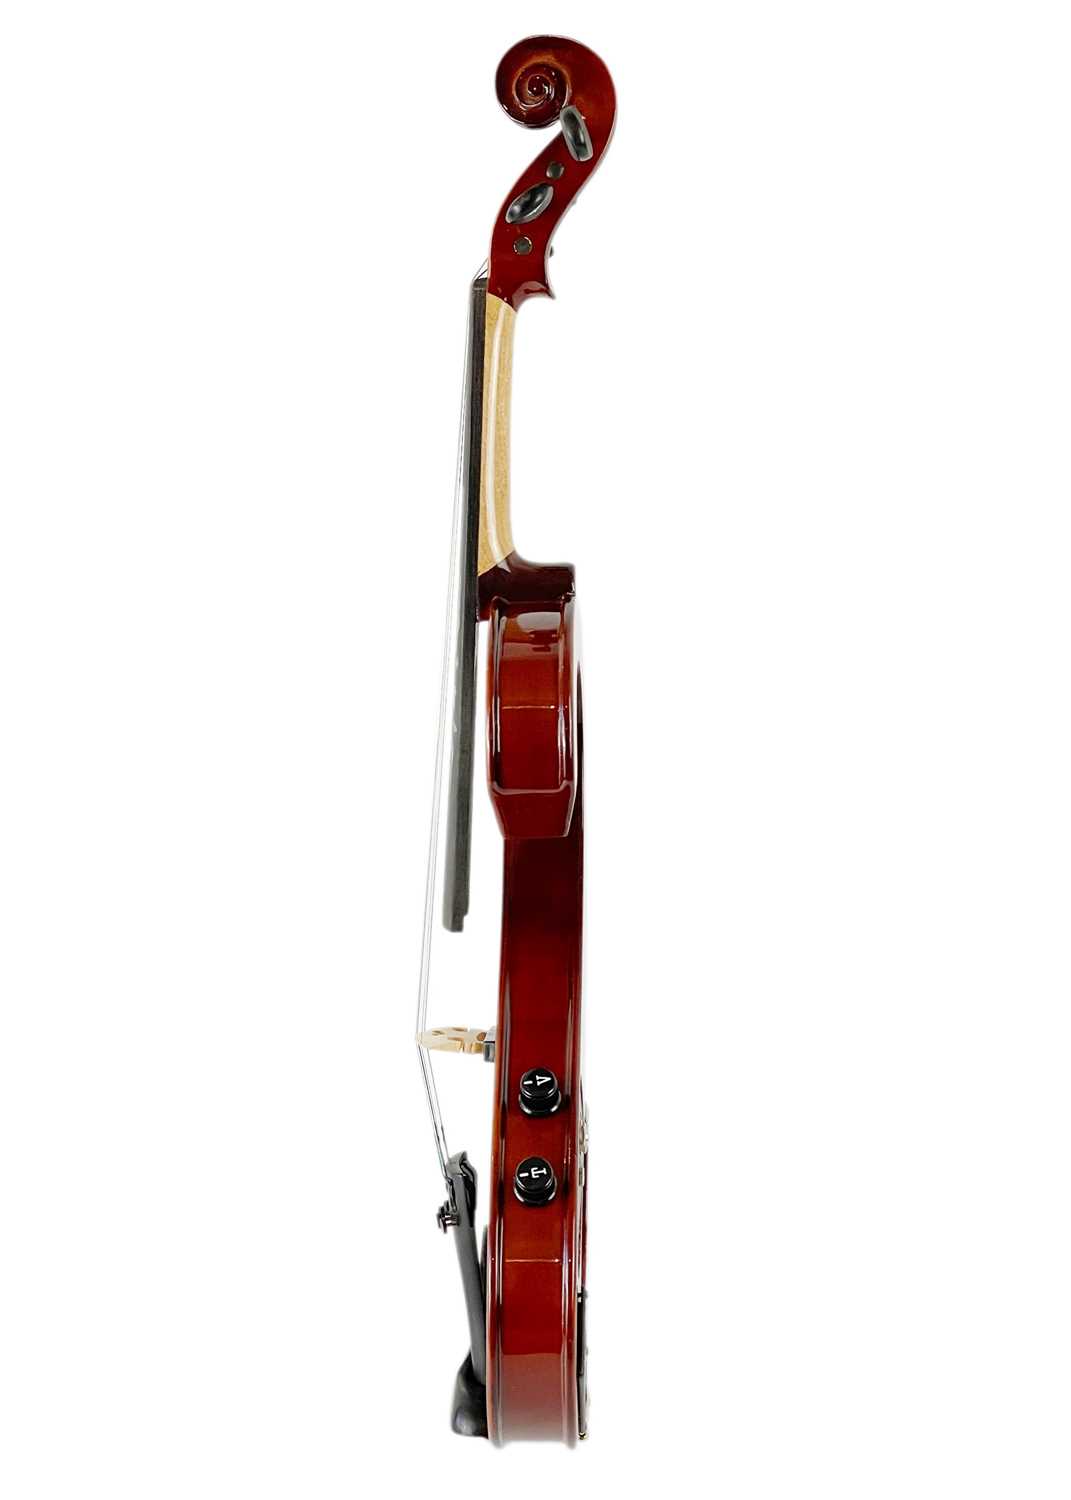 An electric violin. - Image 6 of 11